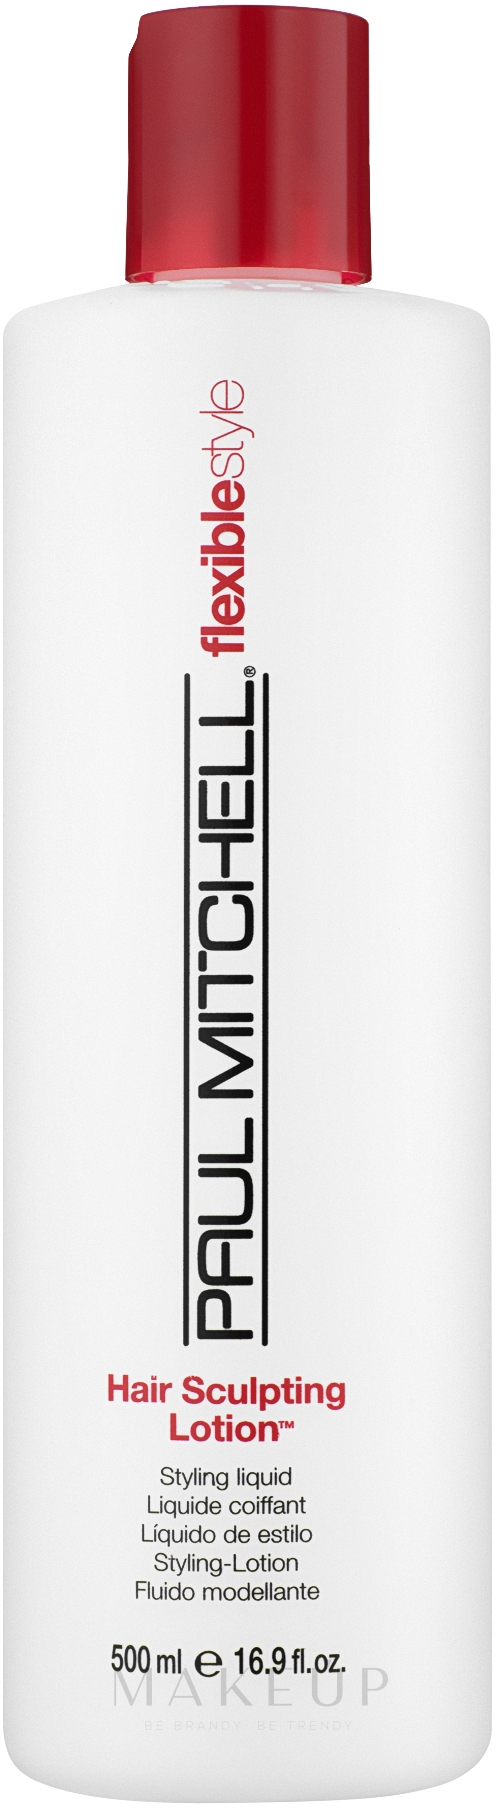 Haarstylinglotion Mittlerer Halt - Paul Mitchell Flexible Style Hair Sculpting Lotion — Foto 500 ml